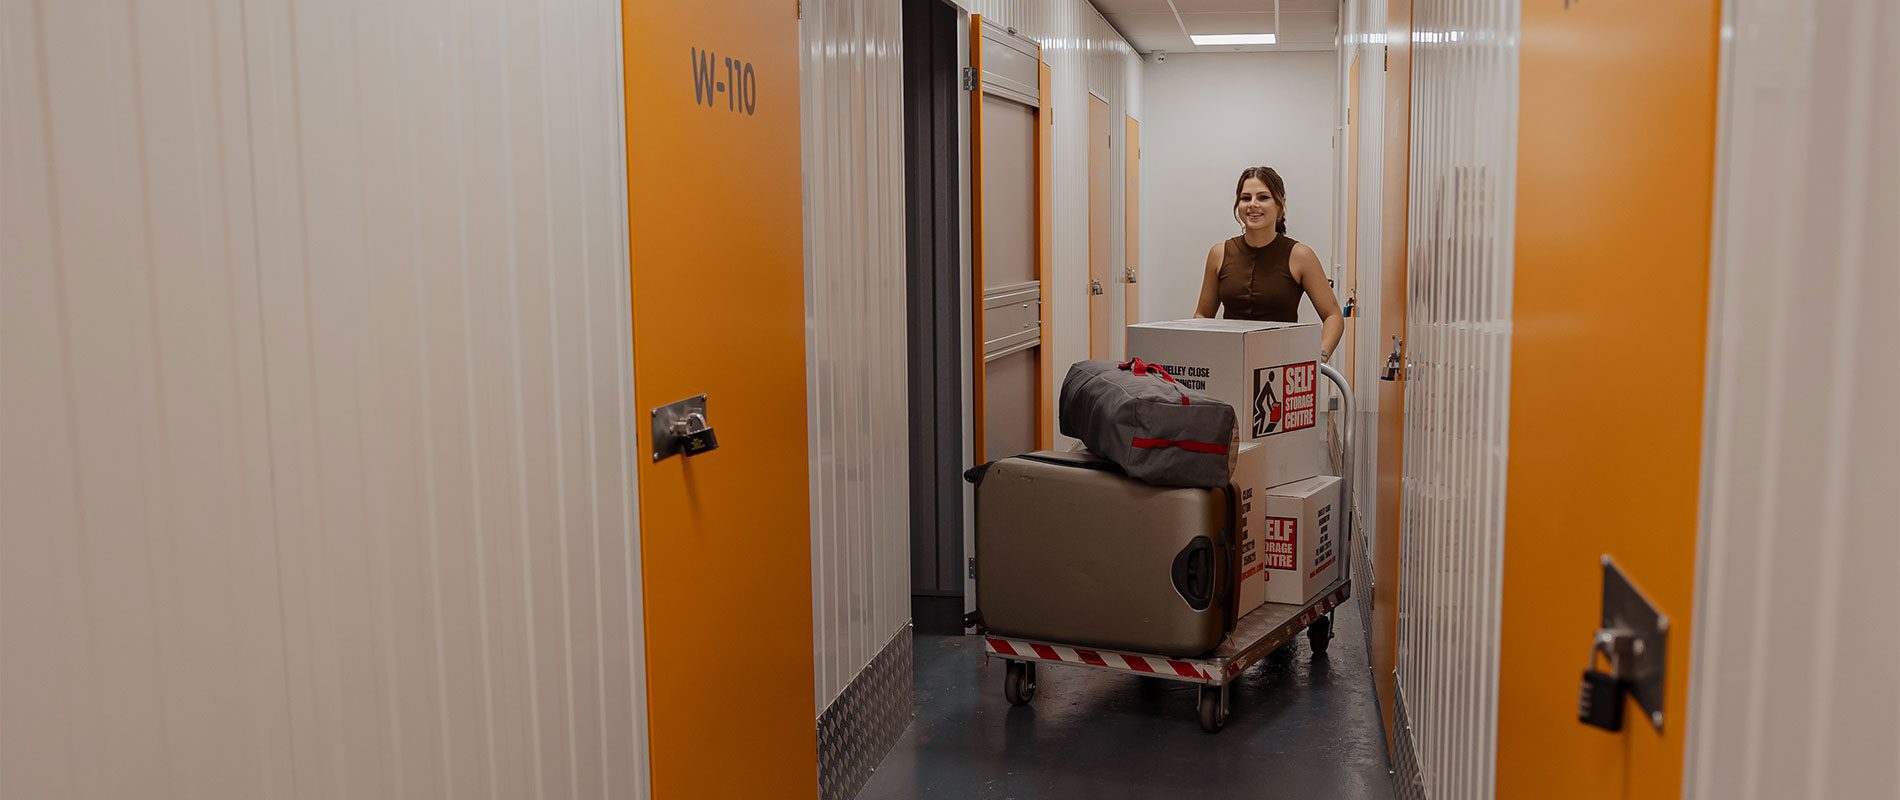 Lucy pushing the trolley inside the facility